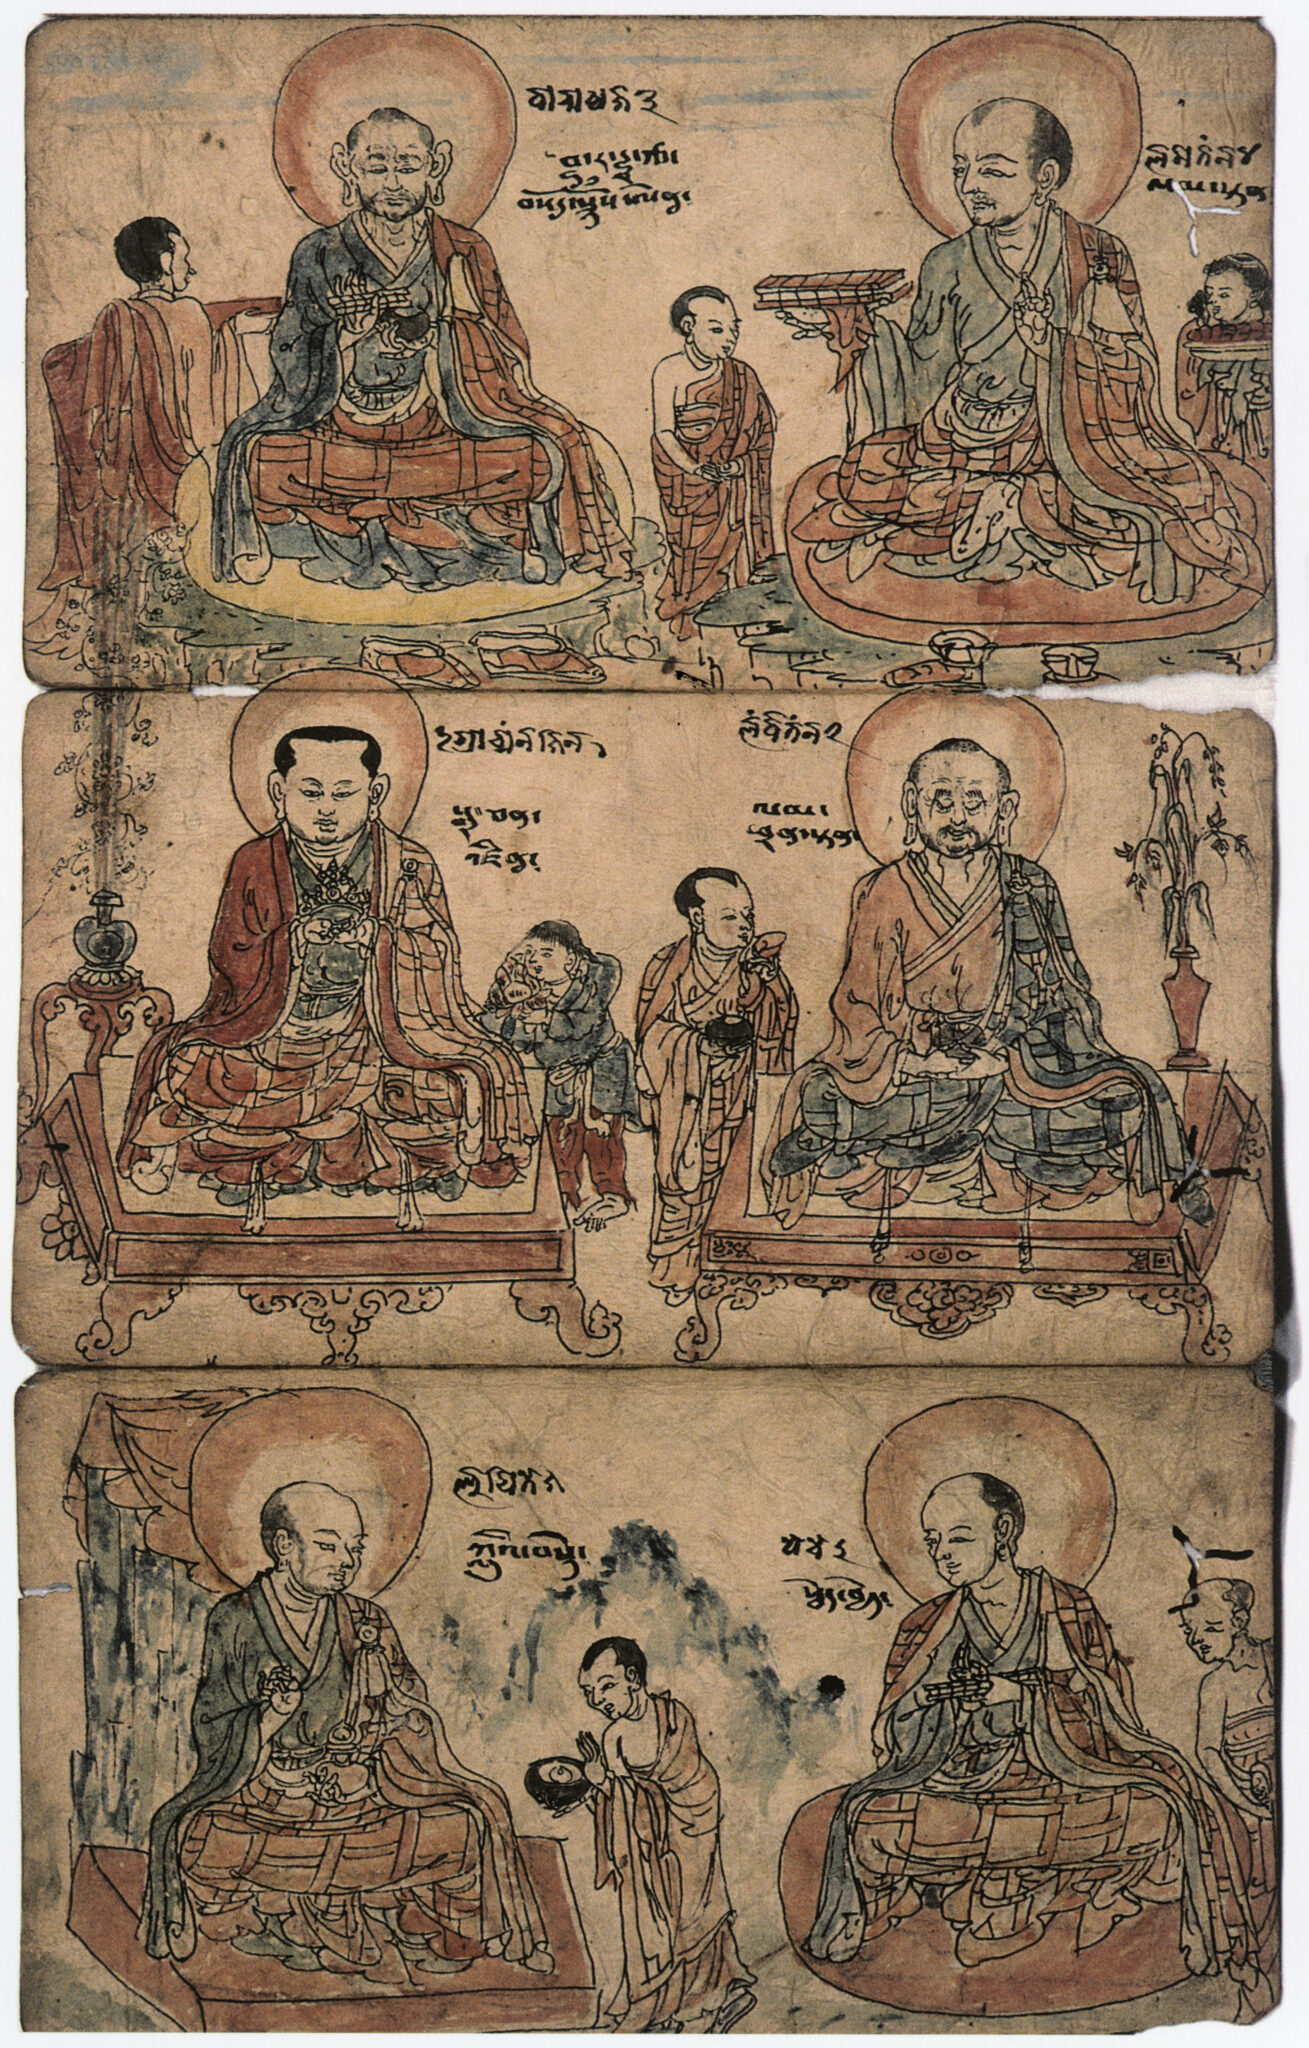 Three pages arranged vertically: each page features illustration in color depicting two seated figures and attendants